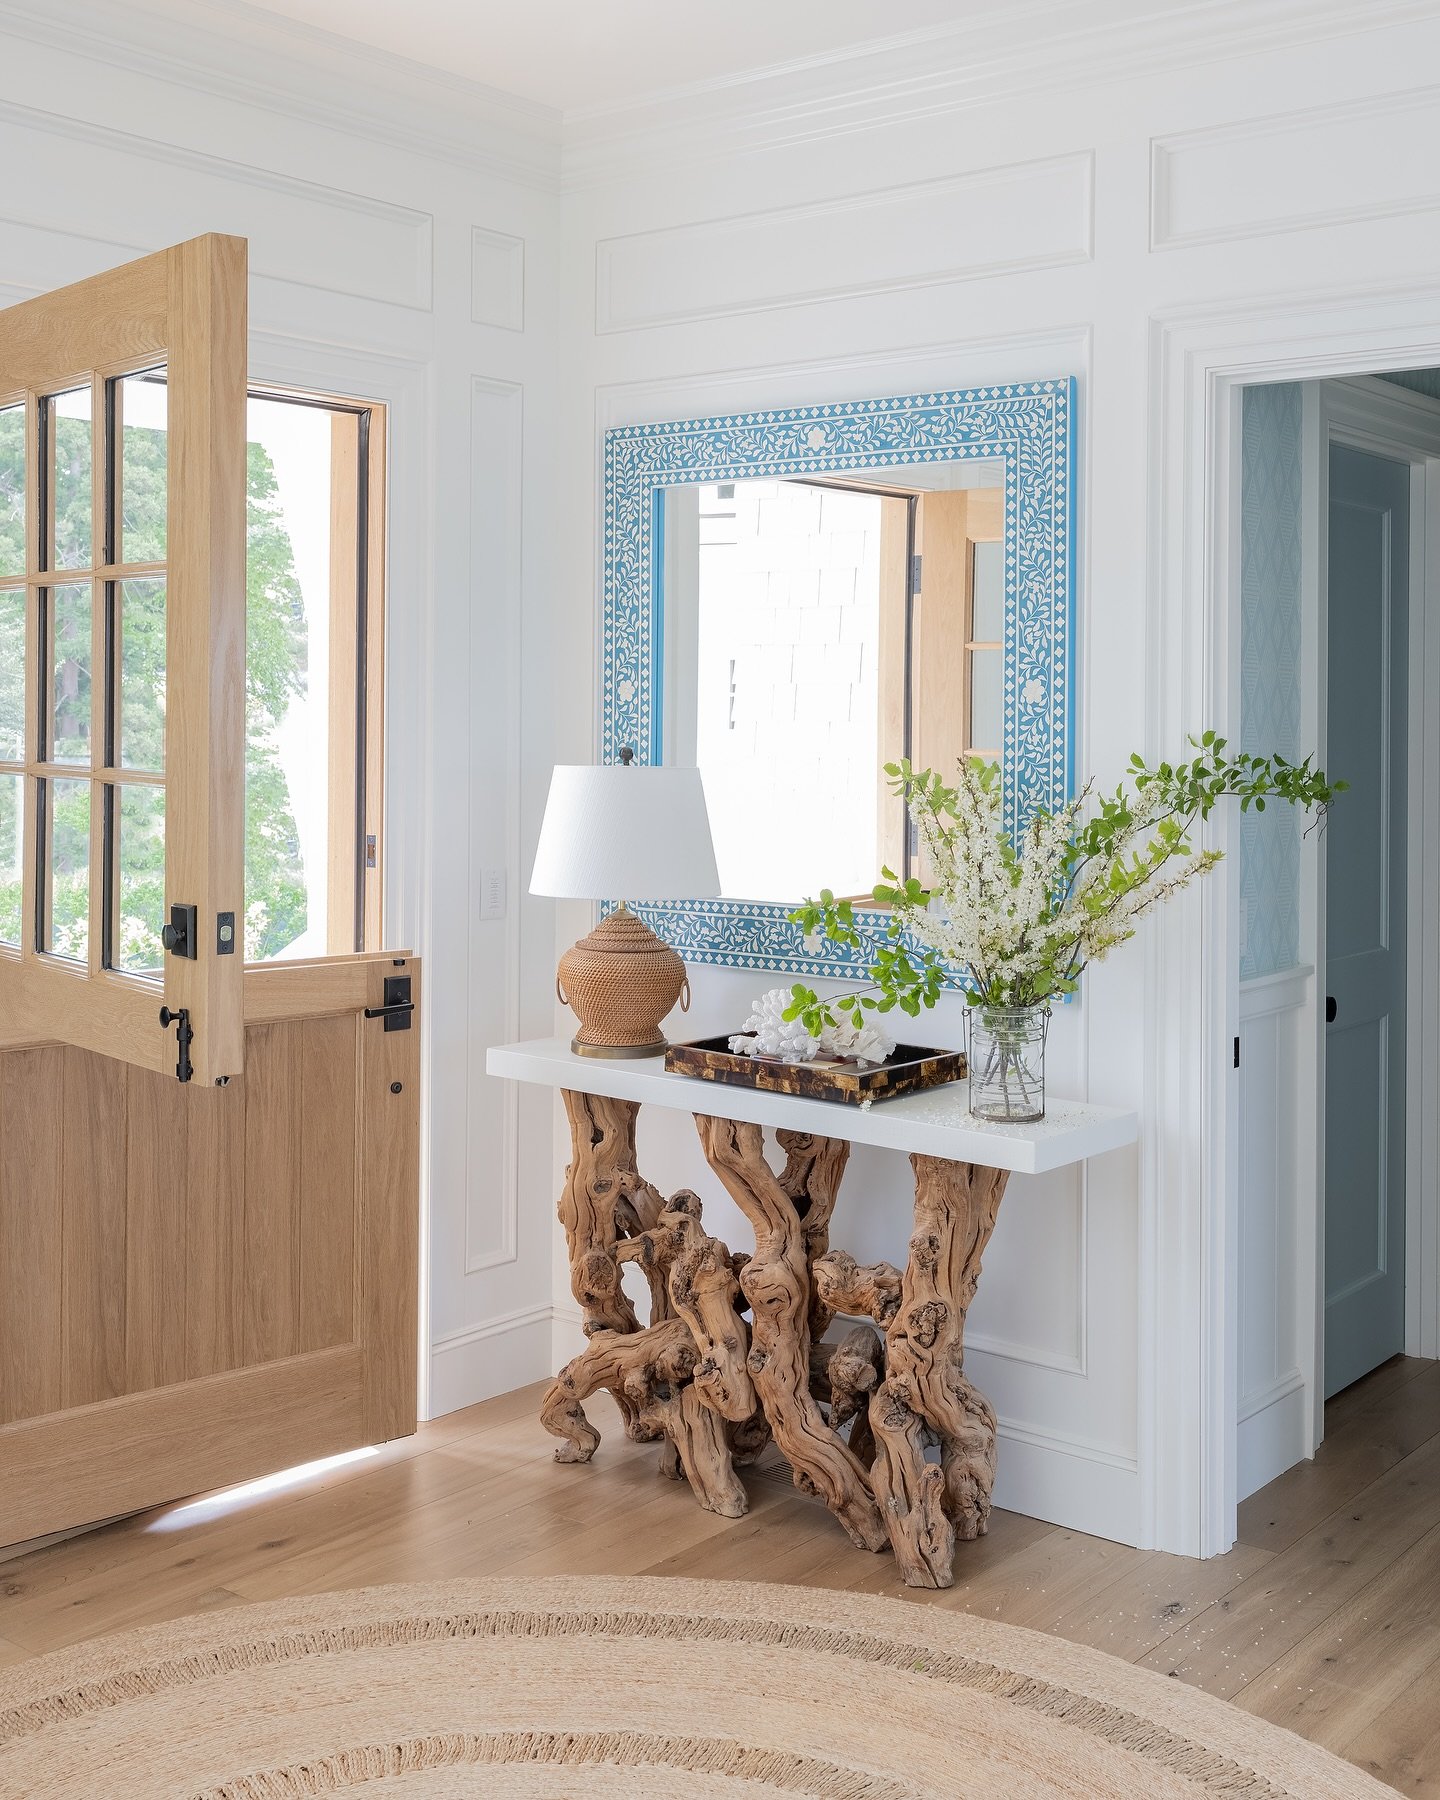 We&rsquo;re opening the door and letting summer in this weekend - after all, it *is* the unofficial start to the season! Who else is with us?⁣
⁣
⁣
Interior design: @robingannoninteriors⁣
Architect: @patrickahearnarchitect⁣
Builder: @ejjaxtimerbuilder